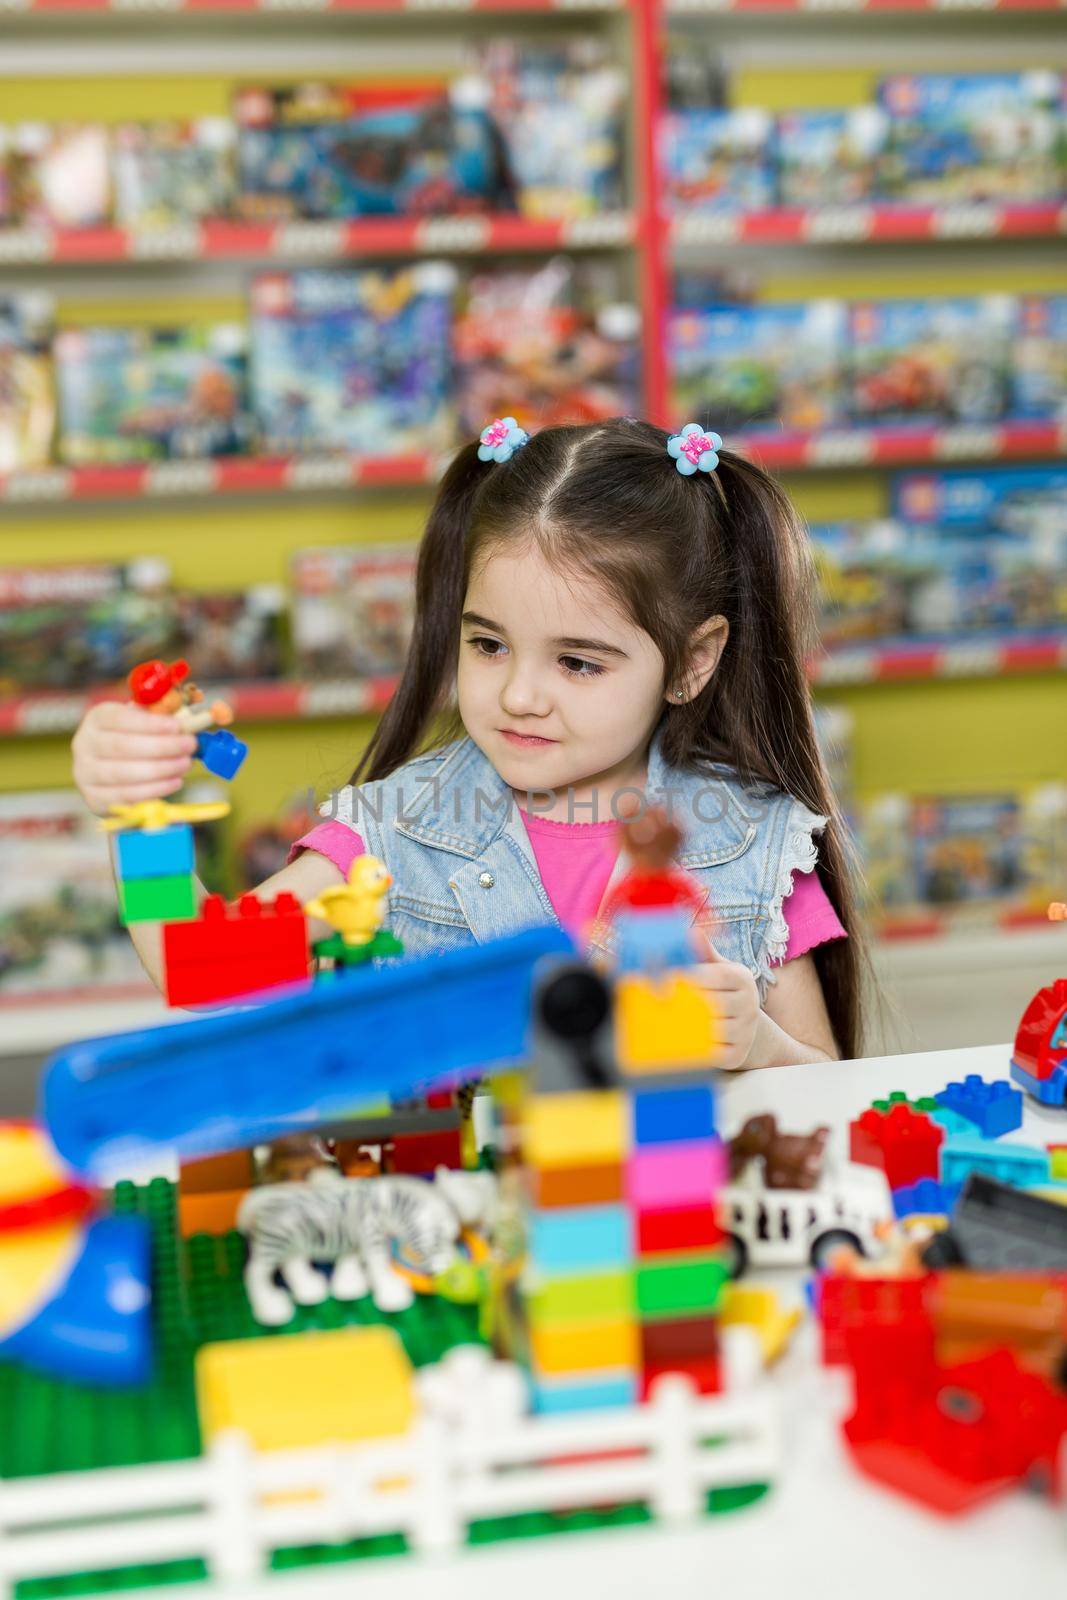 Little girl playing with building blocks in the store